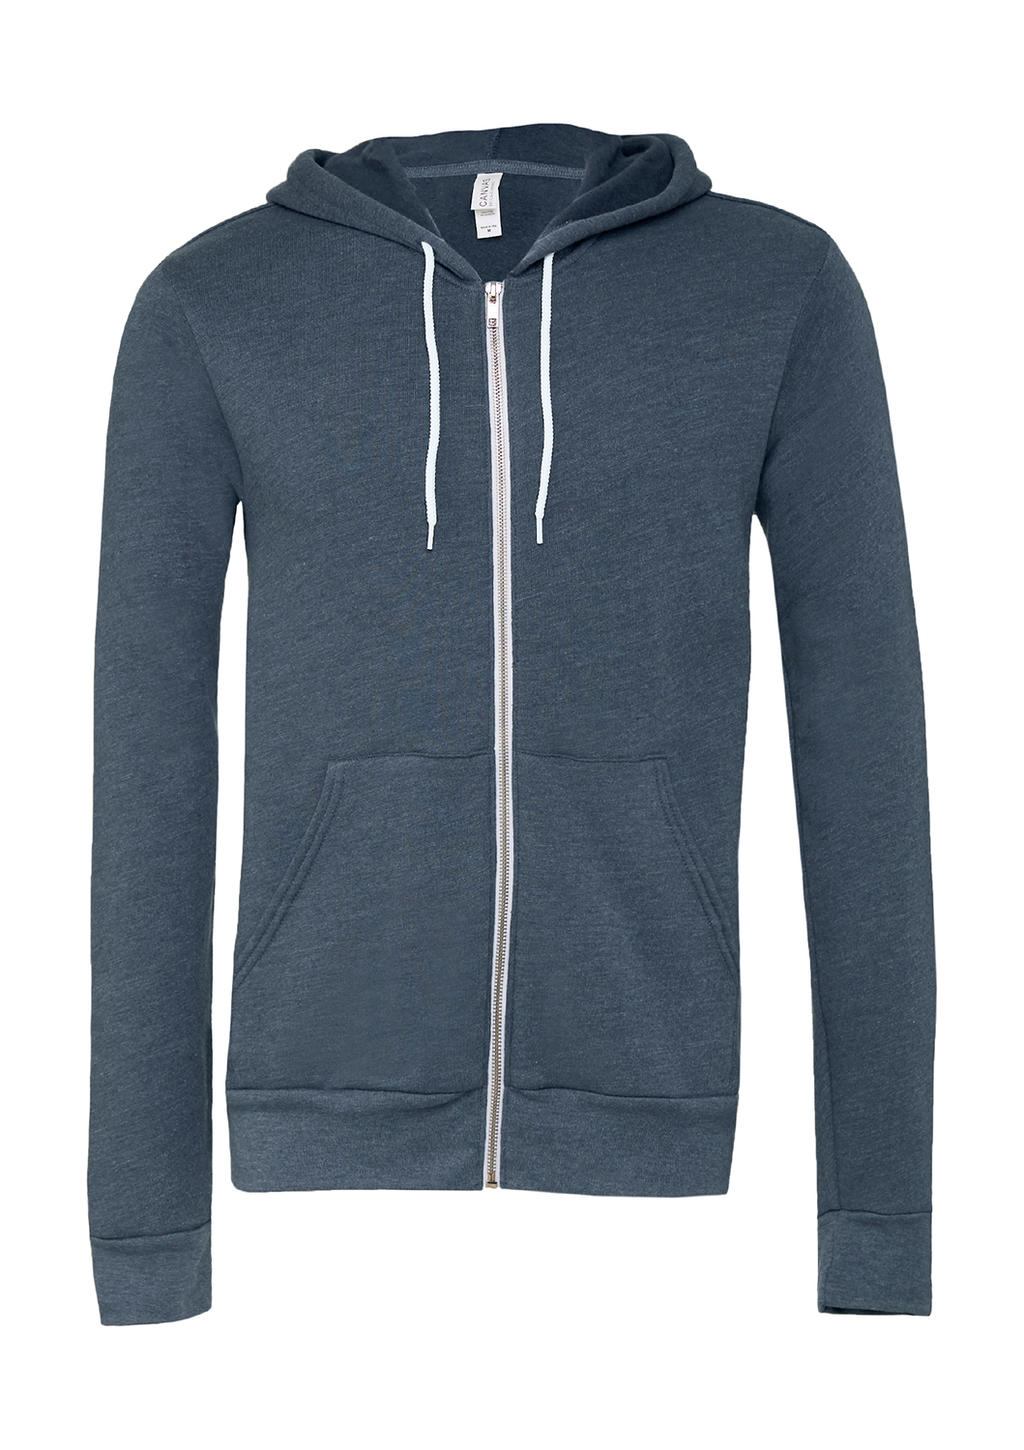  Unisex Poly-Cotton Full Zip Hoodie in Farbe Heather Navy